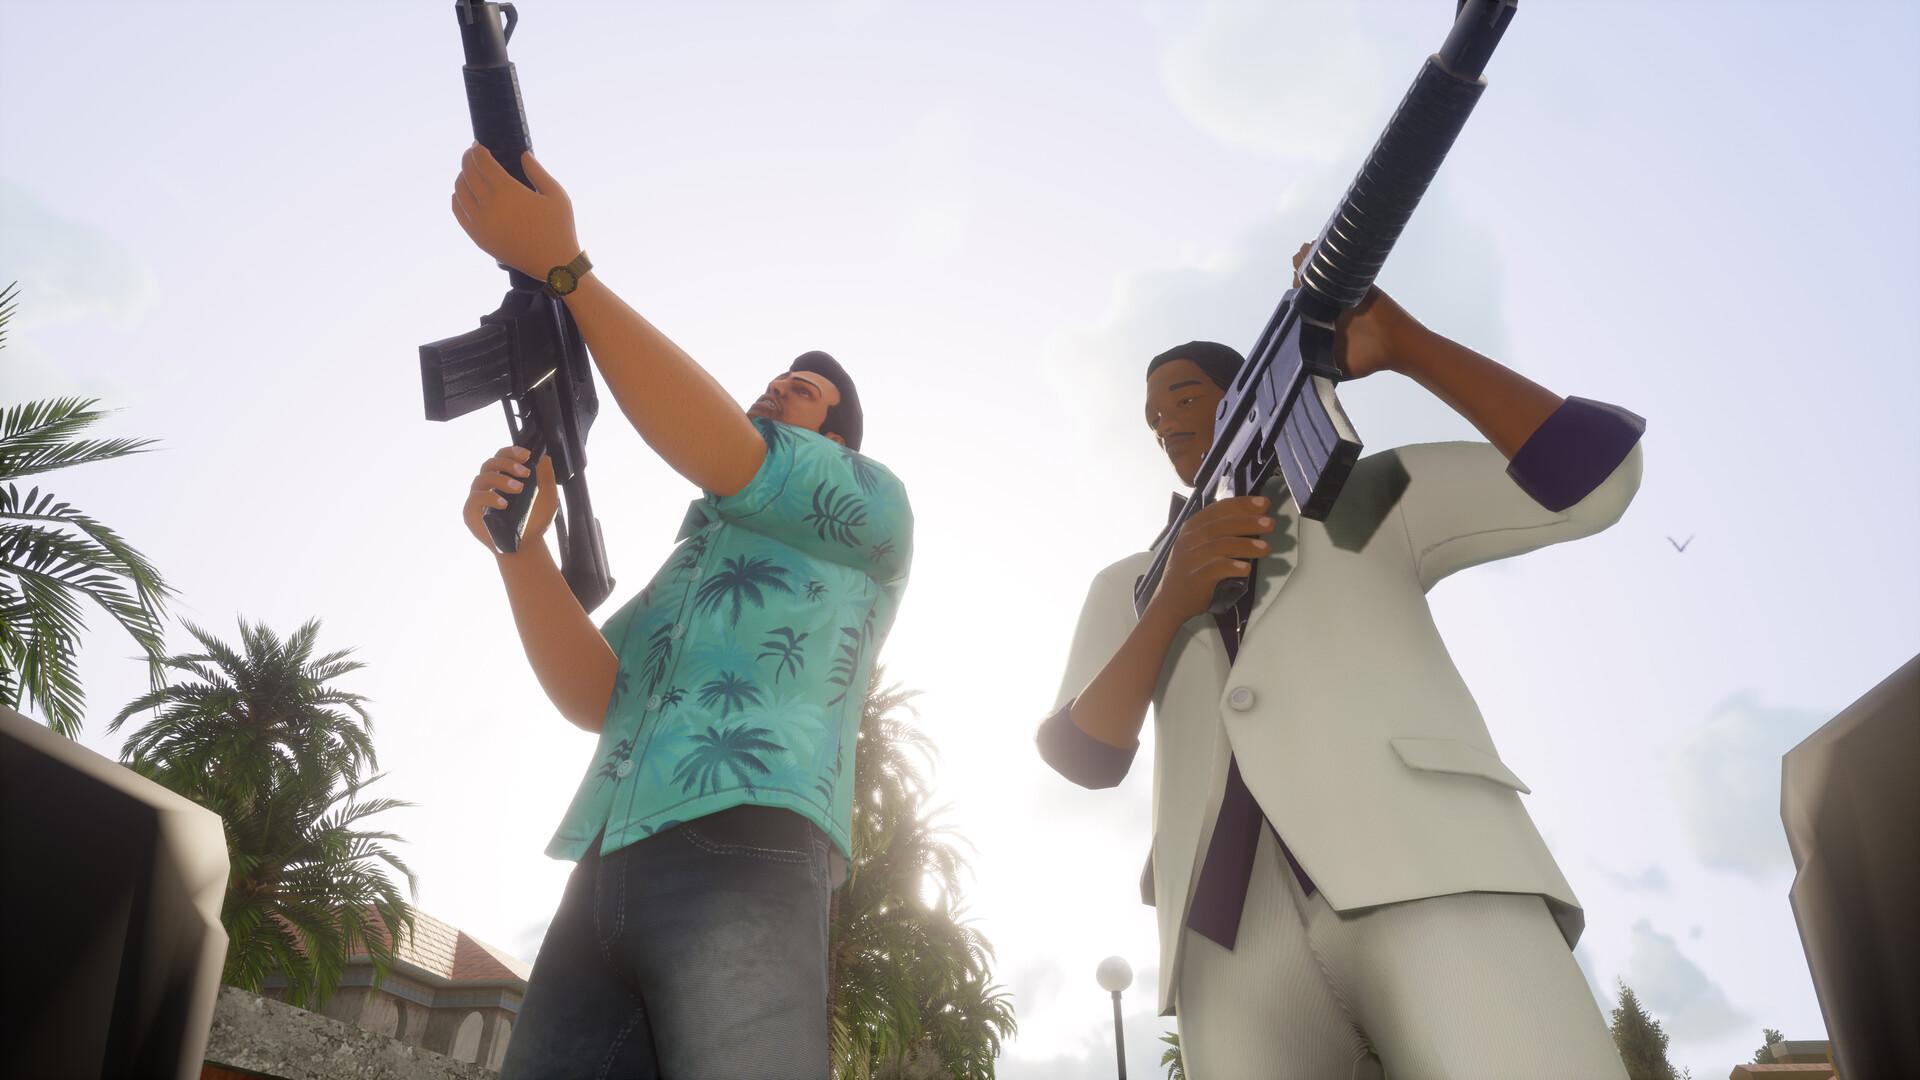 Screenshot №1 from game Grand Theft Auto: Vice City – The Definitive Edition